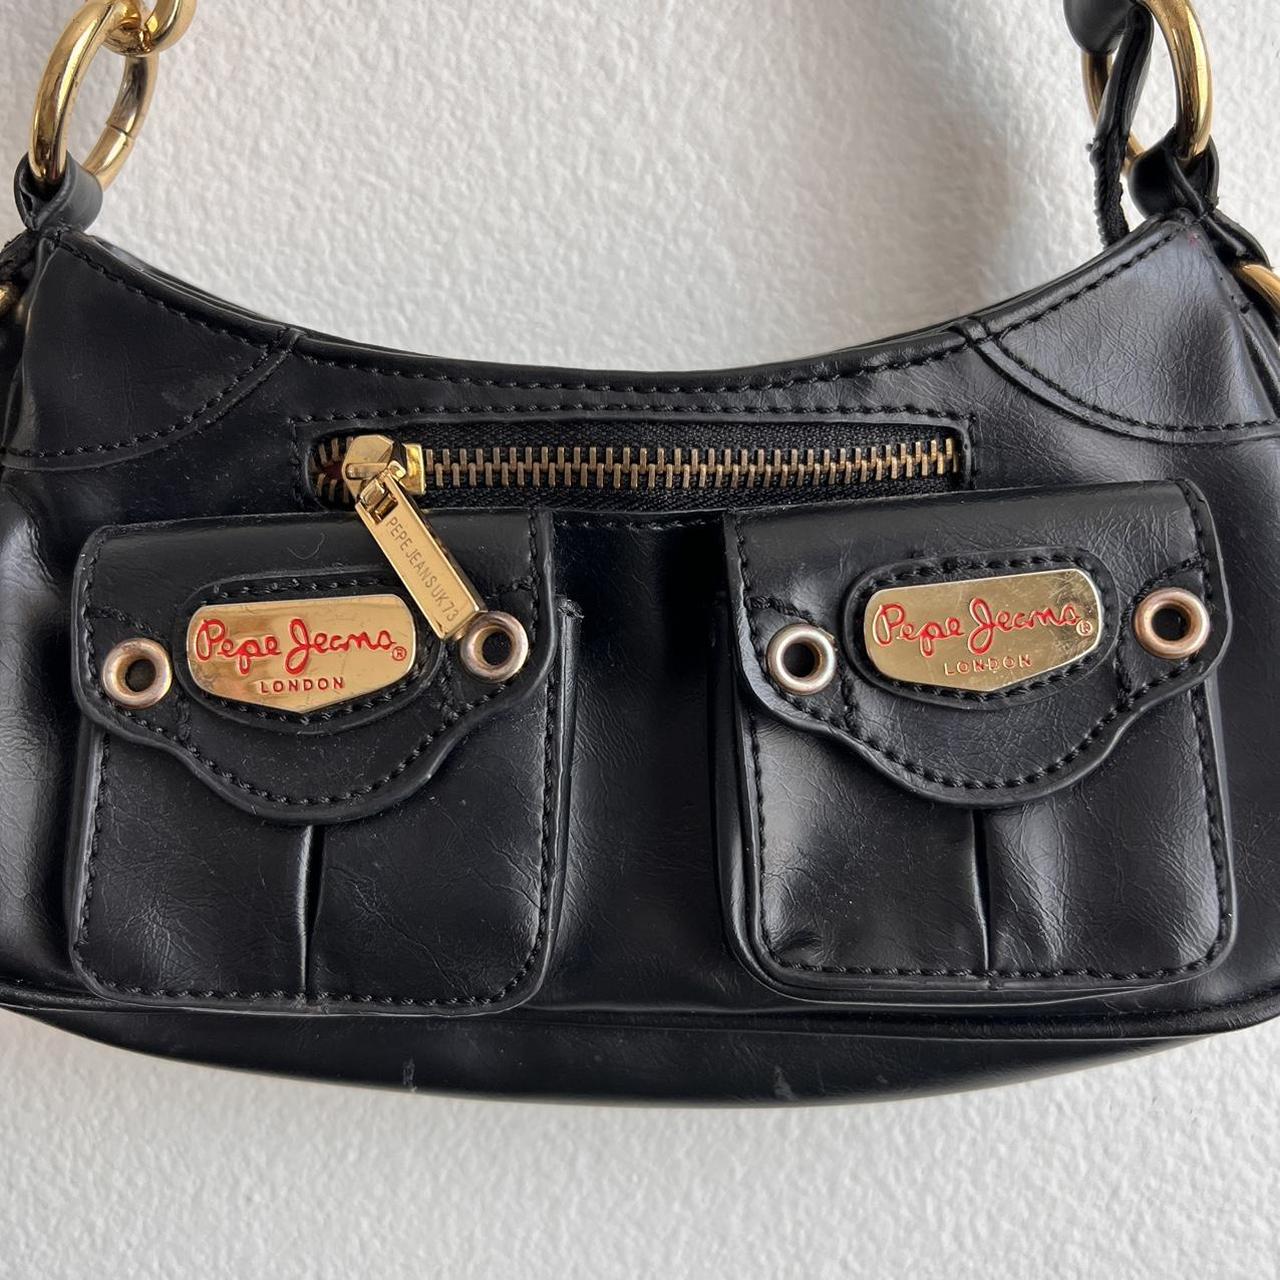 Pepe Jeans Women's Black and Gold Bag (3)